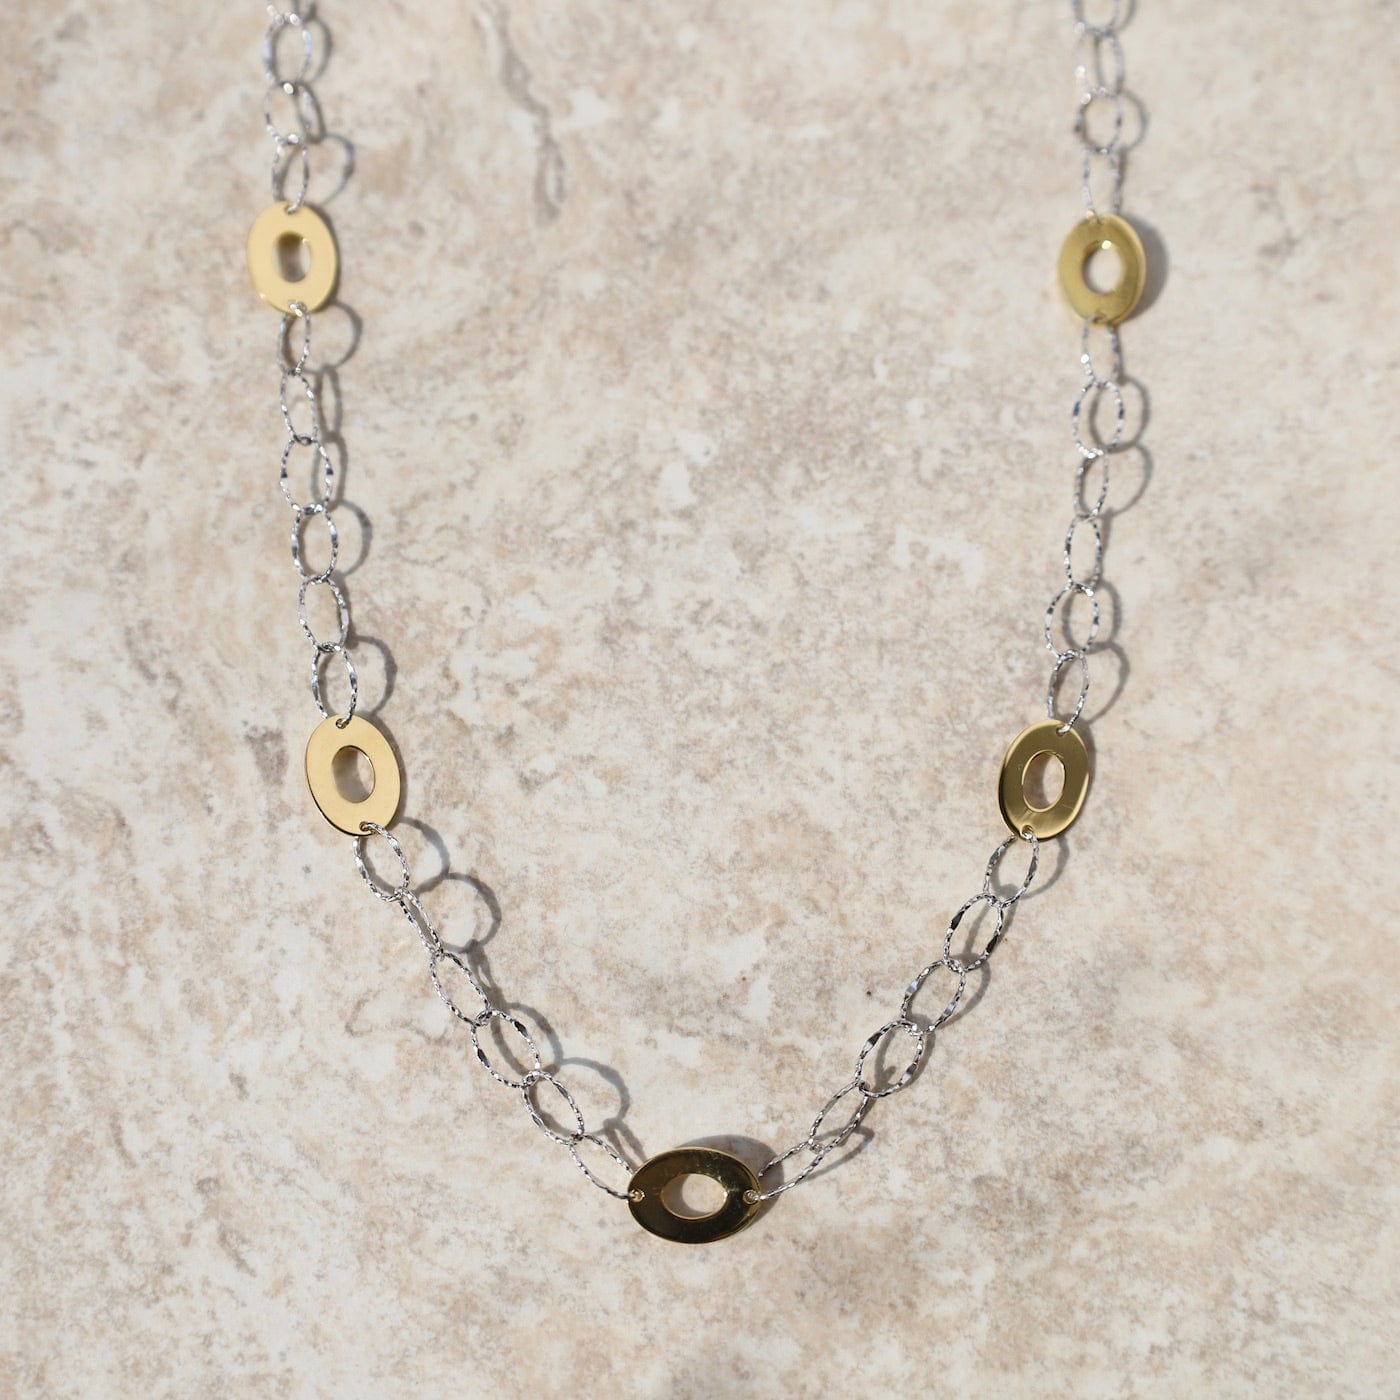 NKL-GPL Oval Delight Necklace